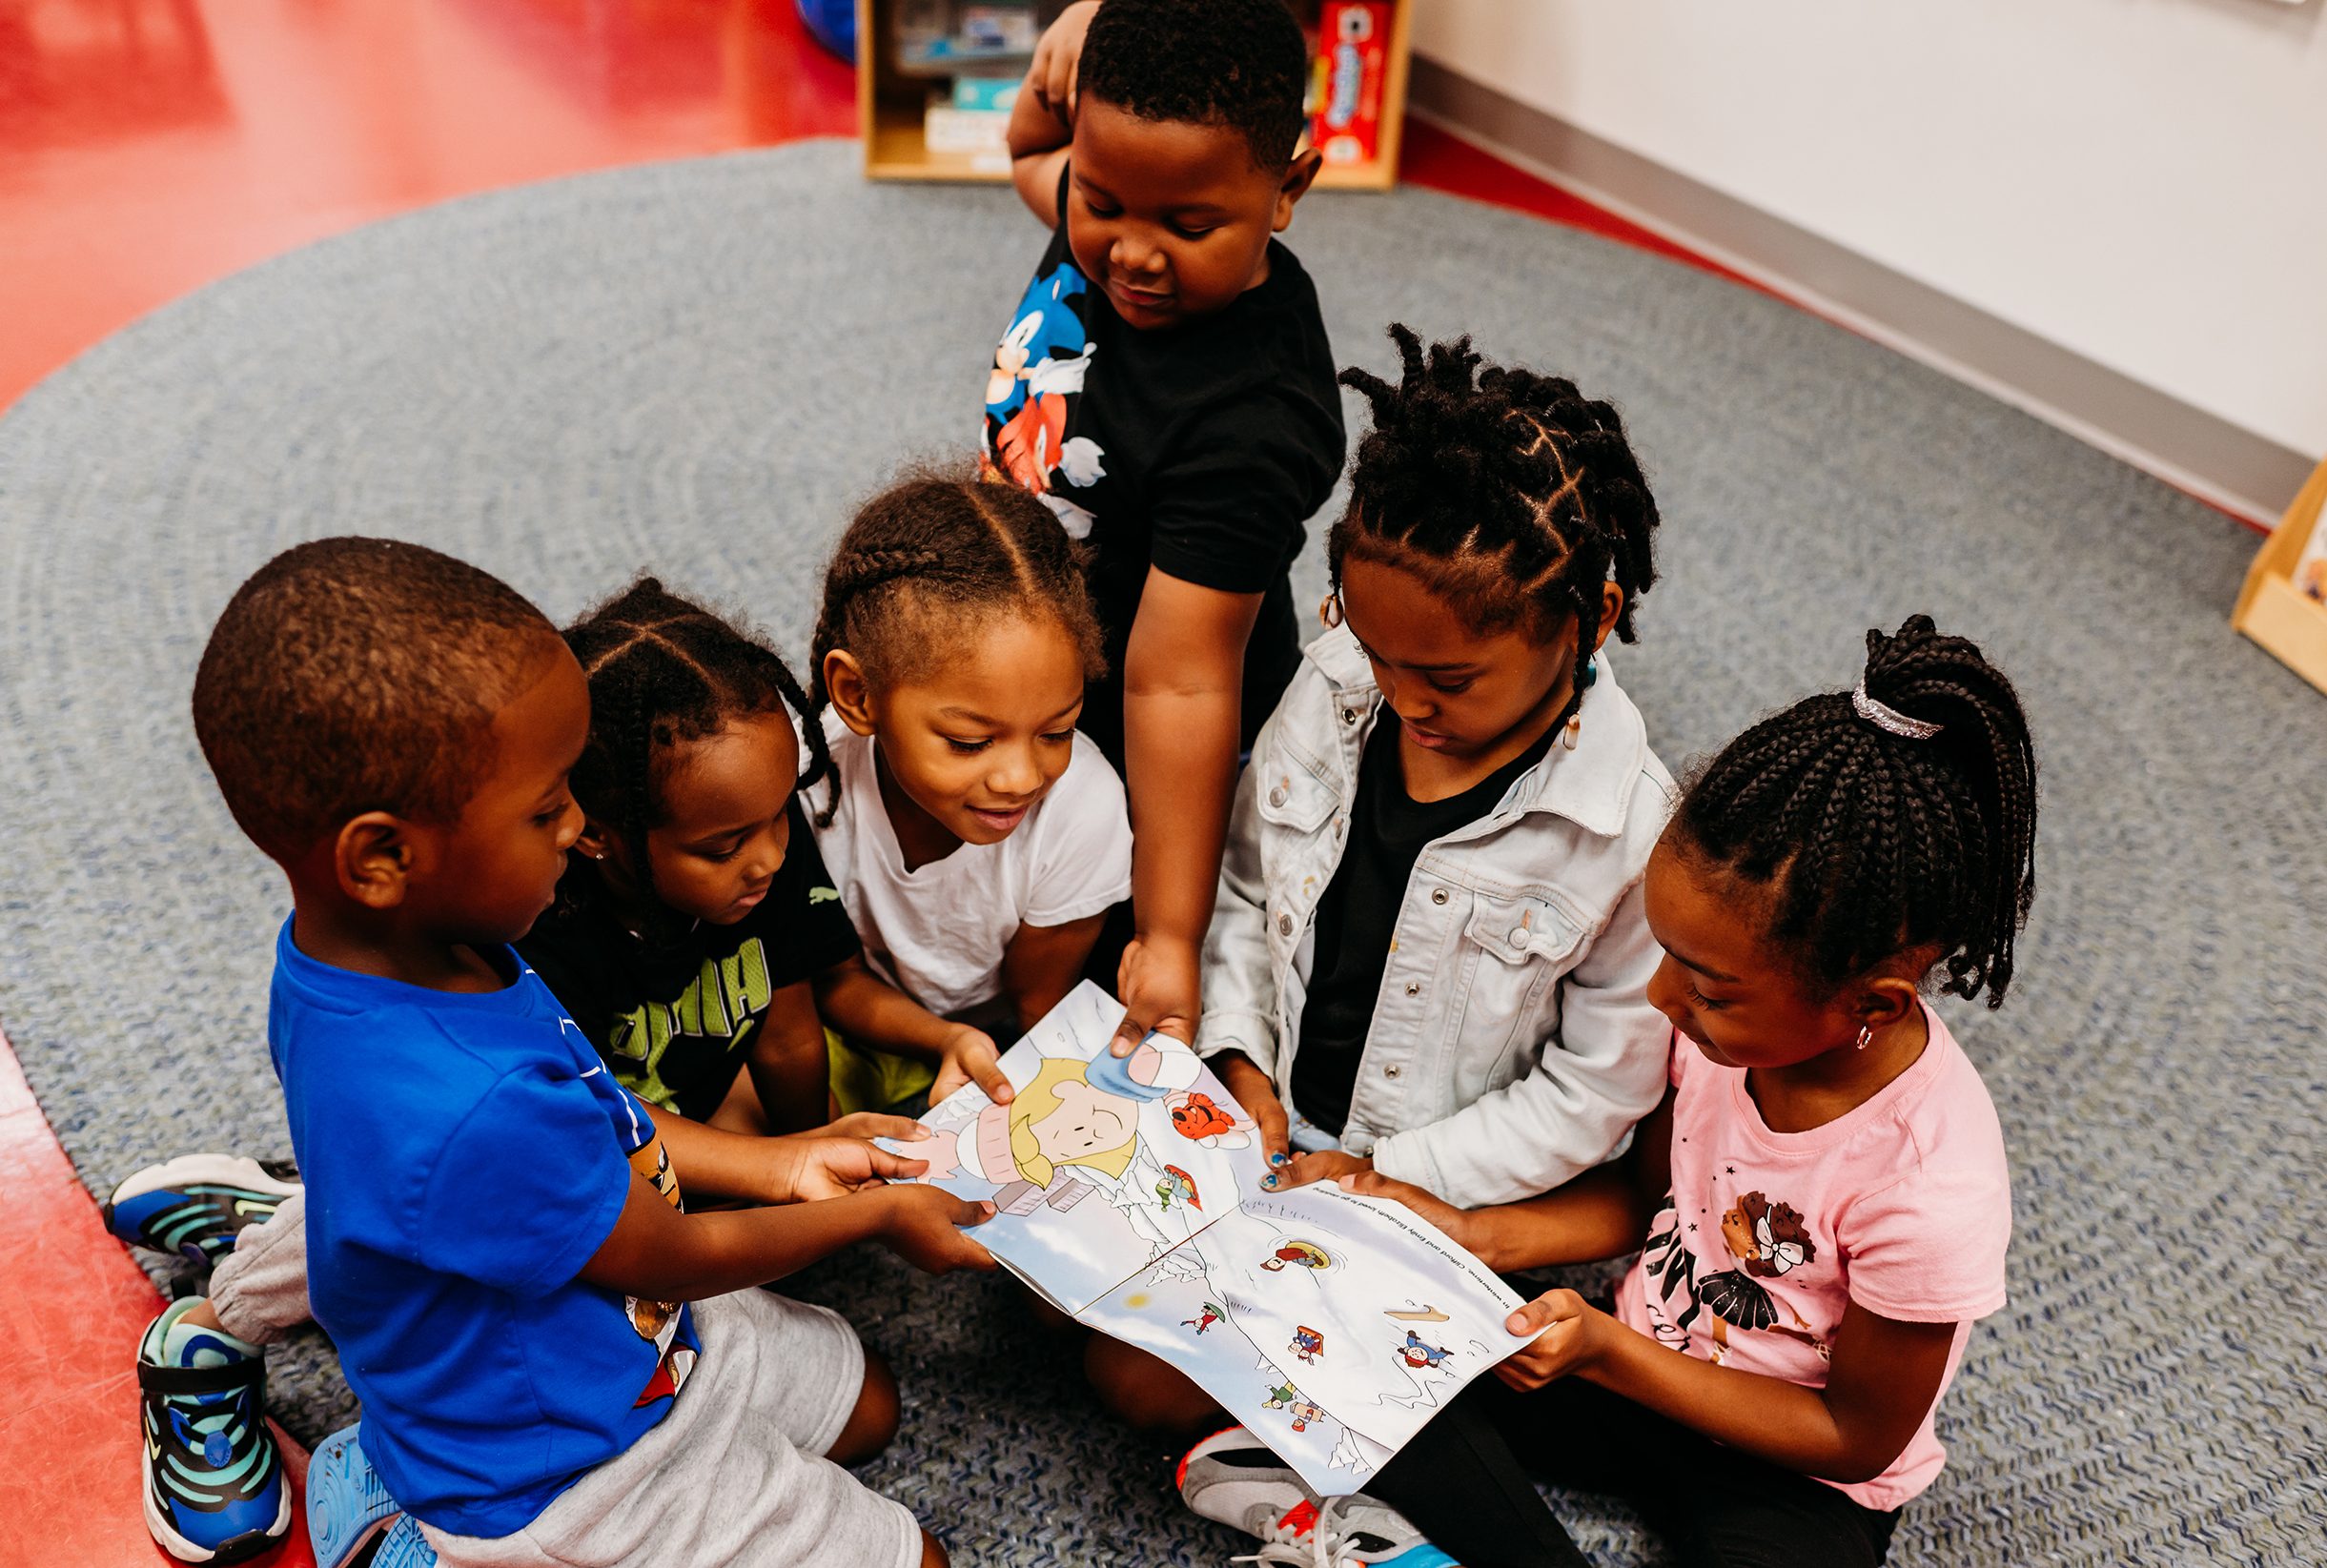 a group of toddlers/preschoolers are gathered around a picture book on the carpet of a daycare center.